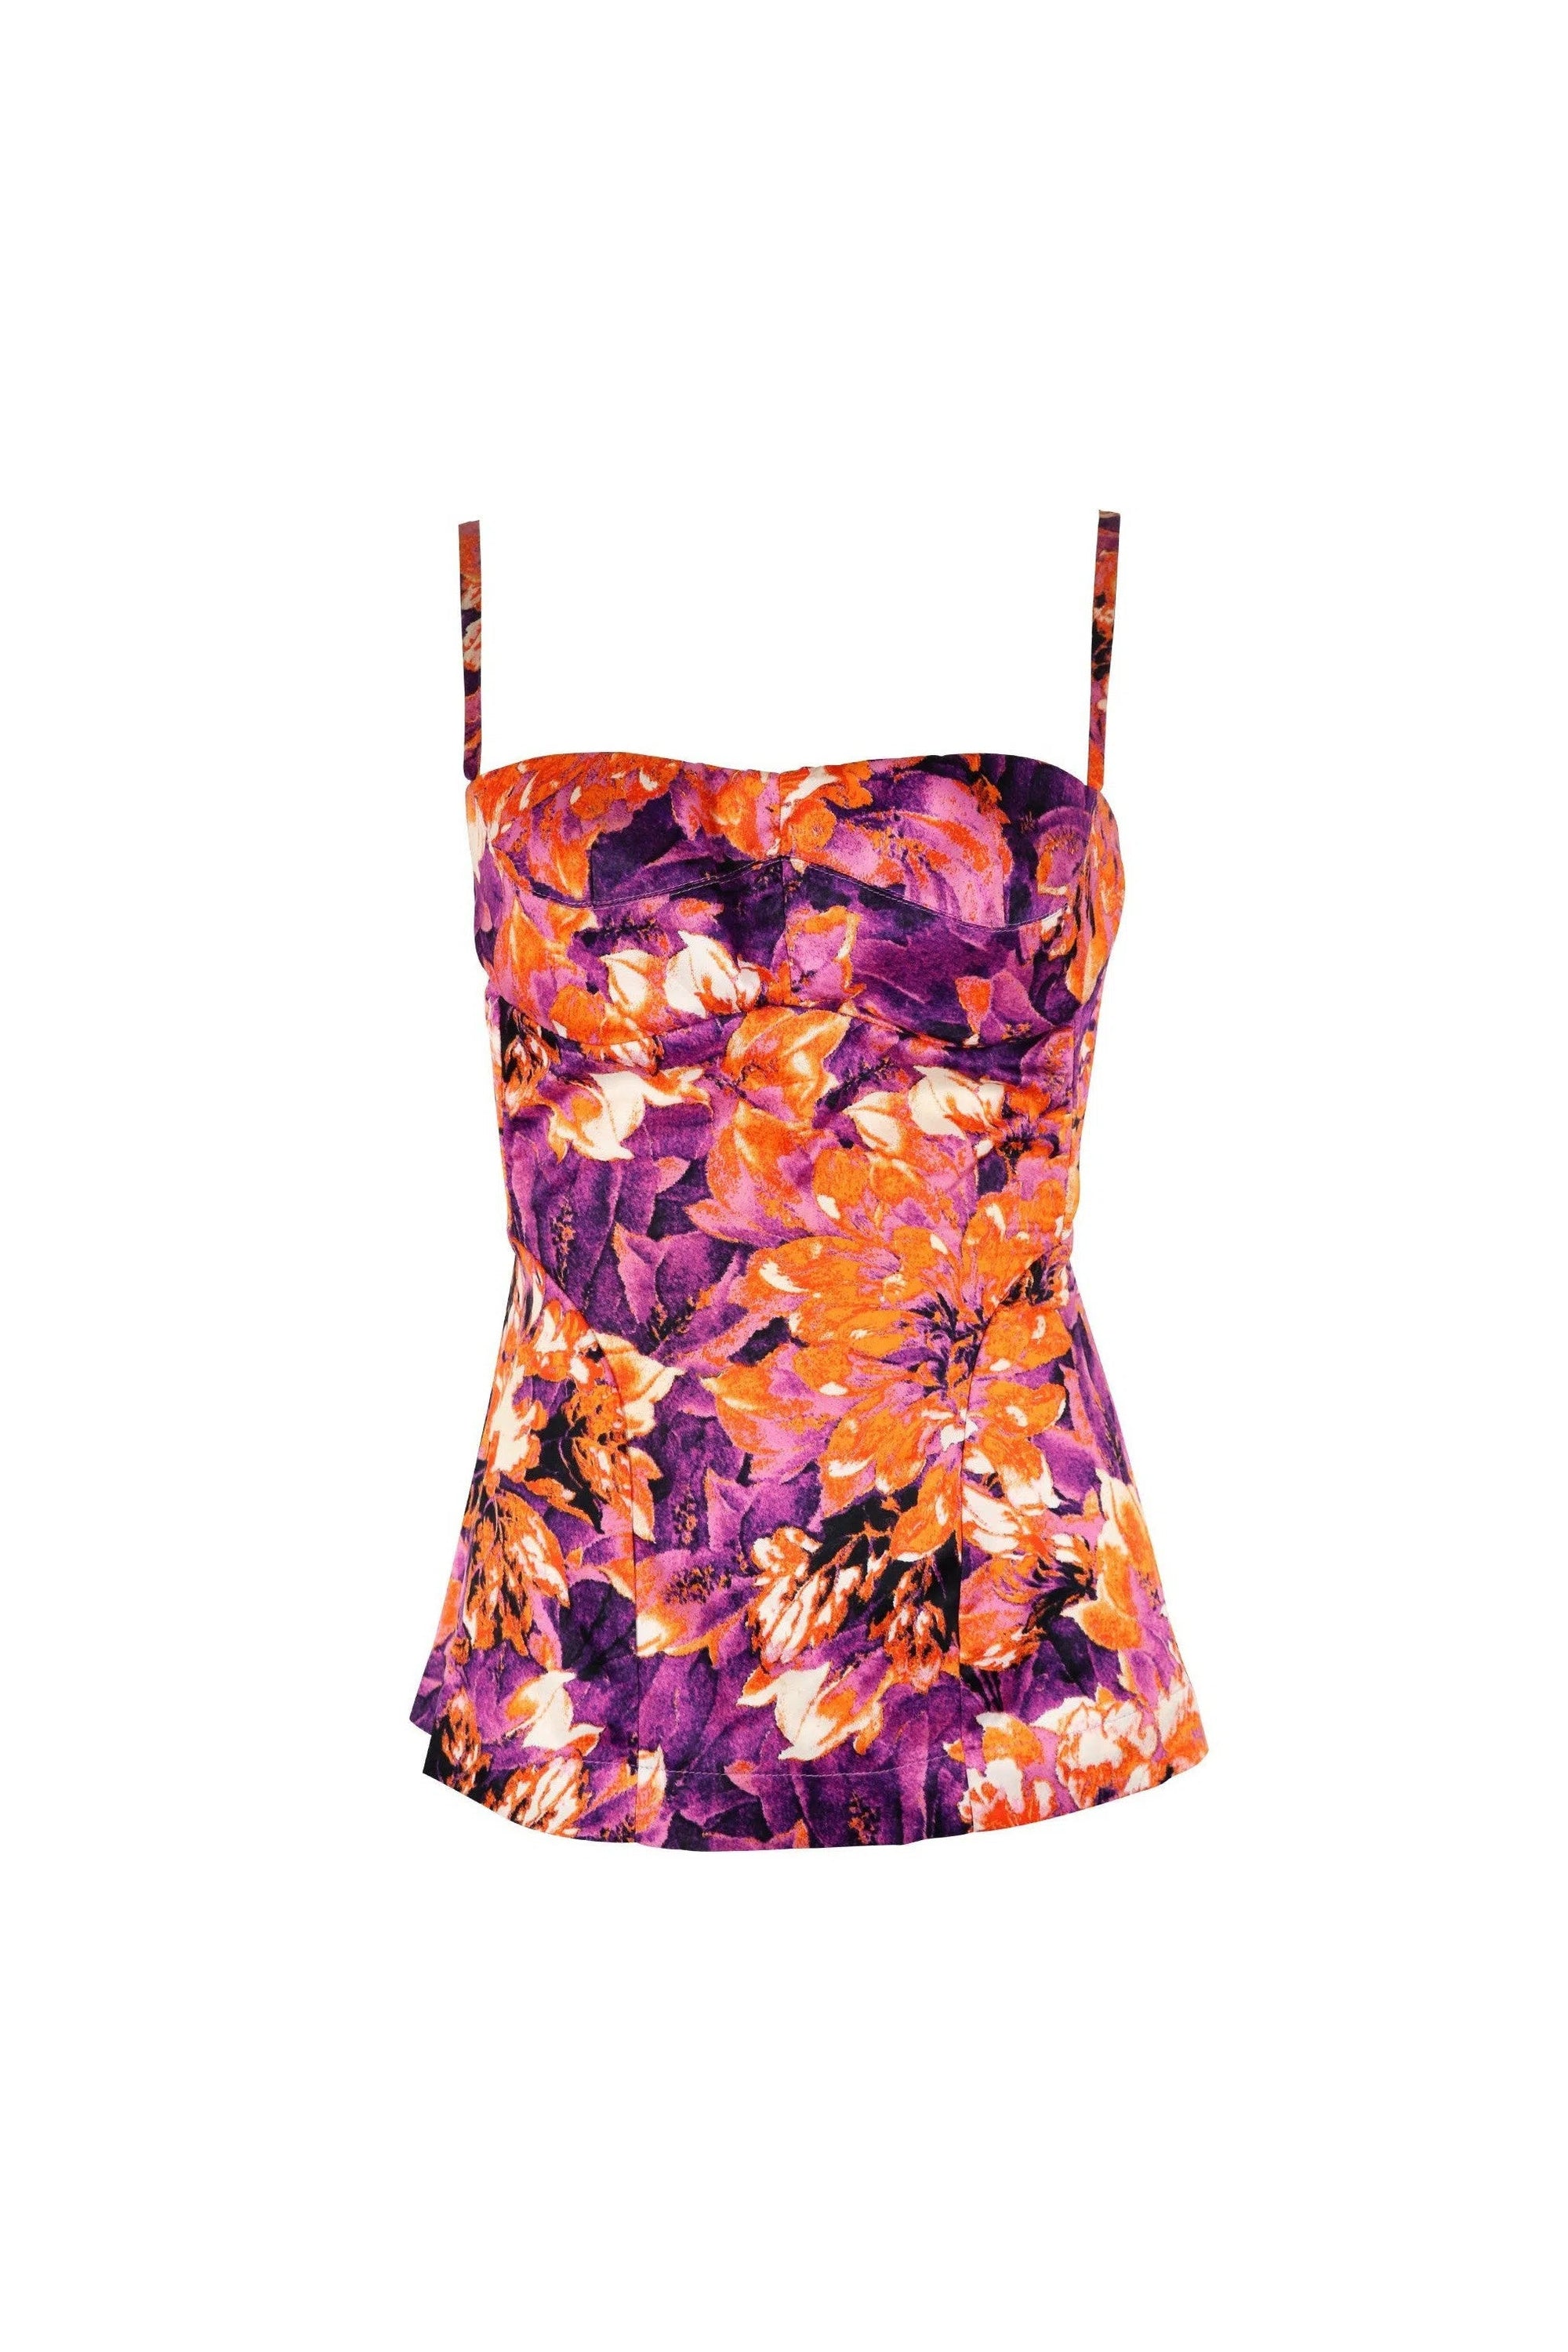 Just Cavalli Floral Bustier - Foxy Couture Carmel